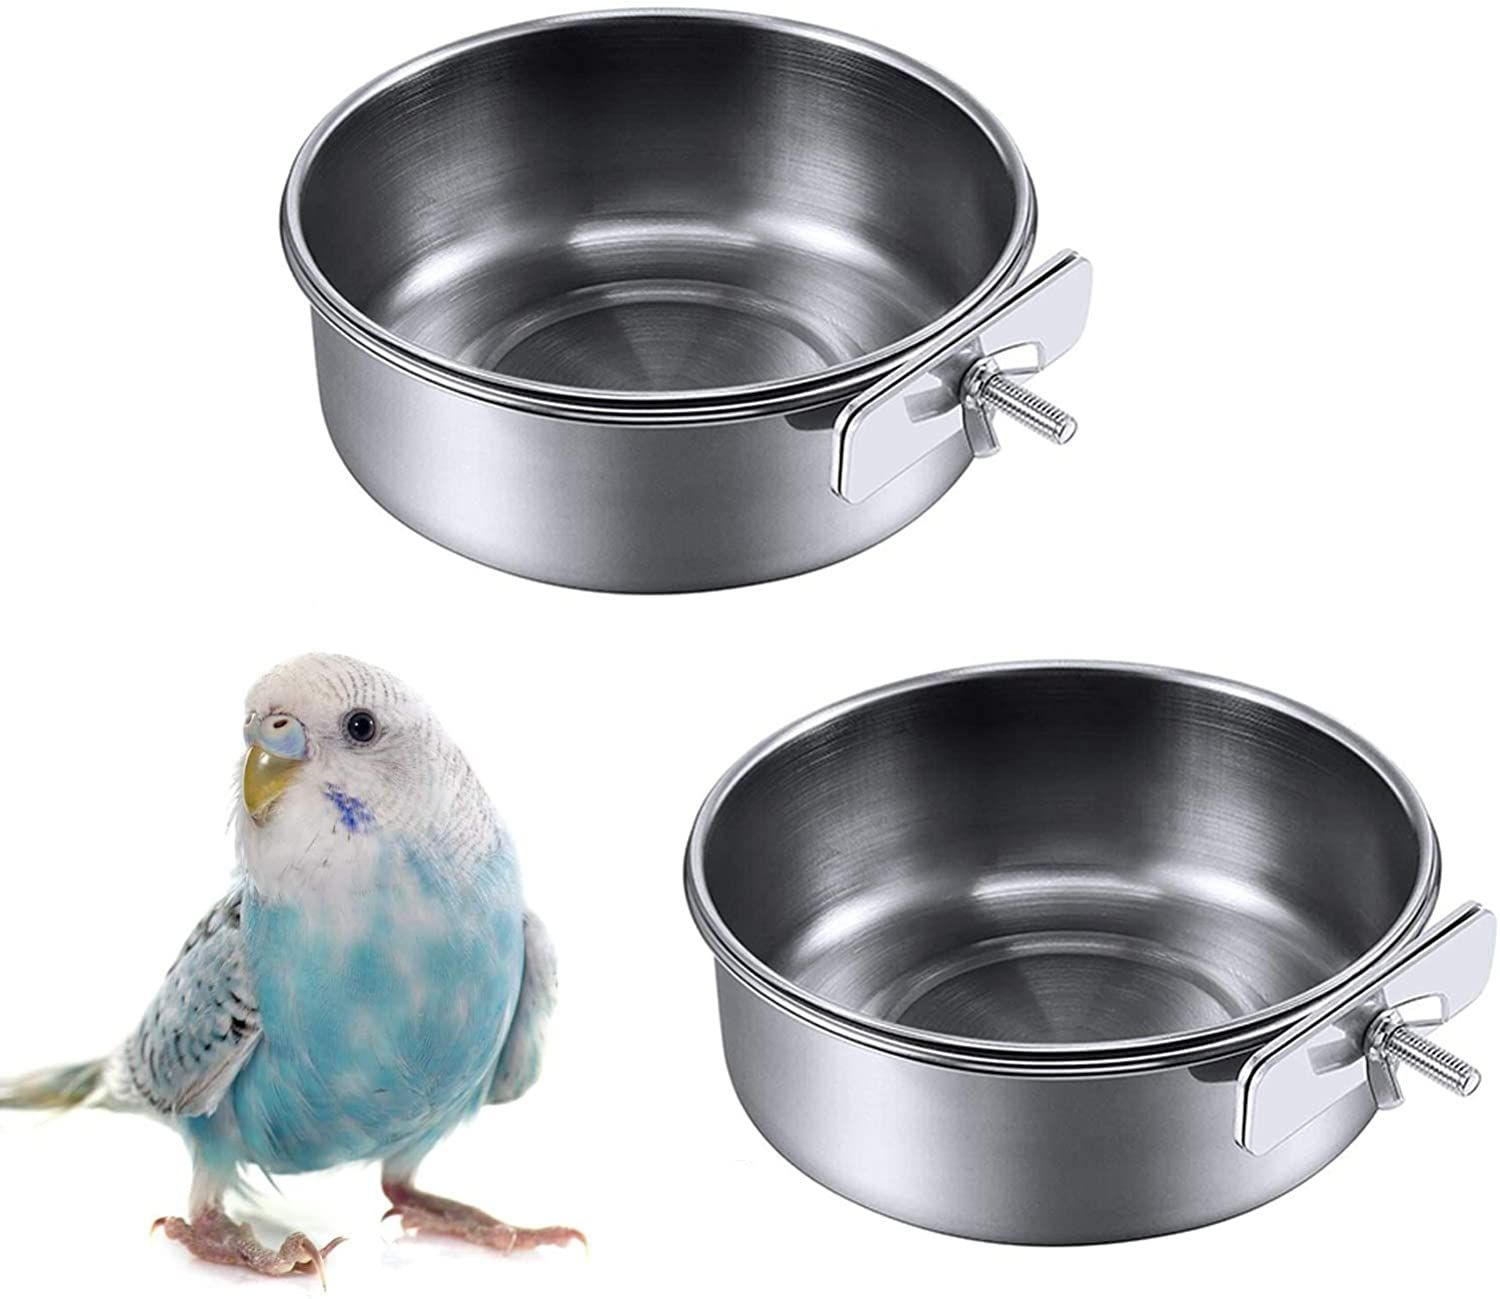 kathson 2 Pack Bird Feeding Cups with Clamp Holder, Parrot Food & Silver 